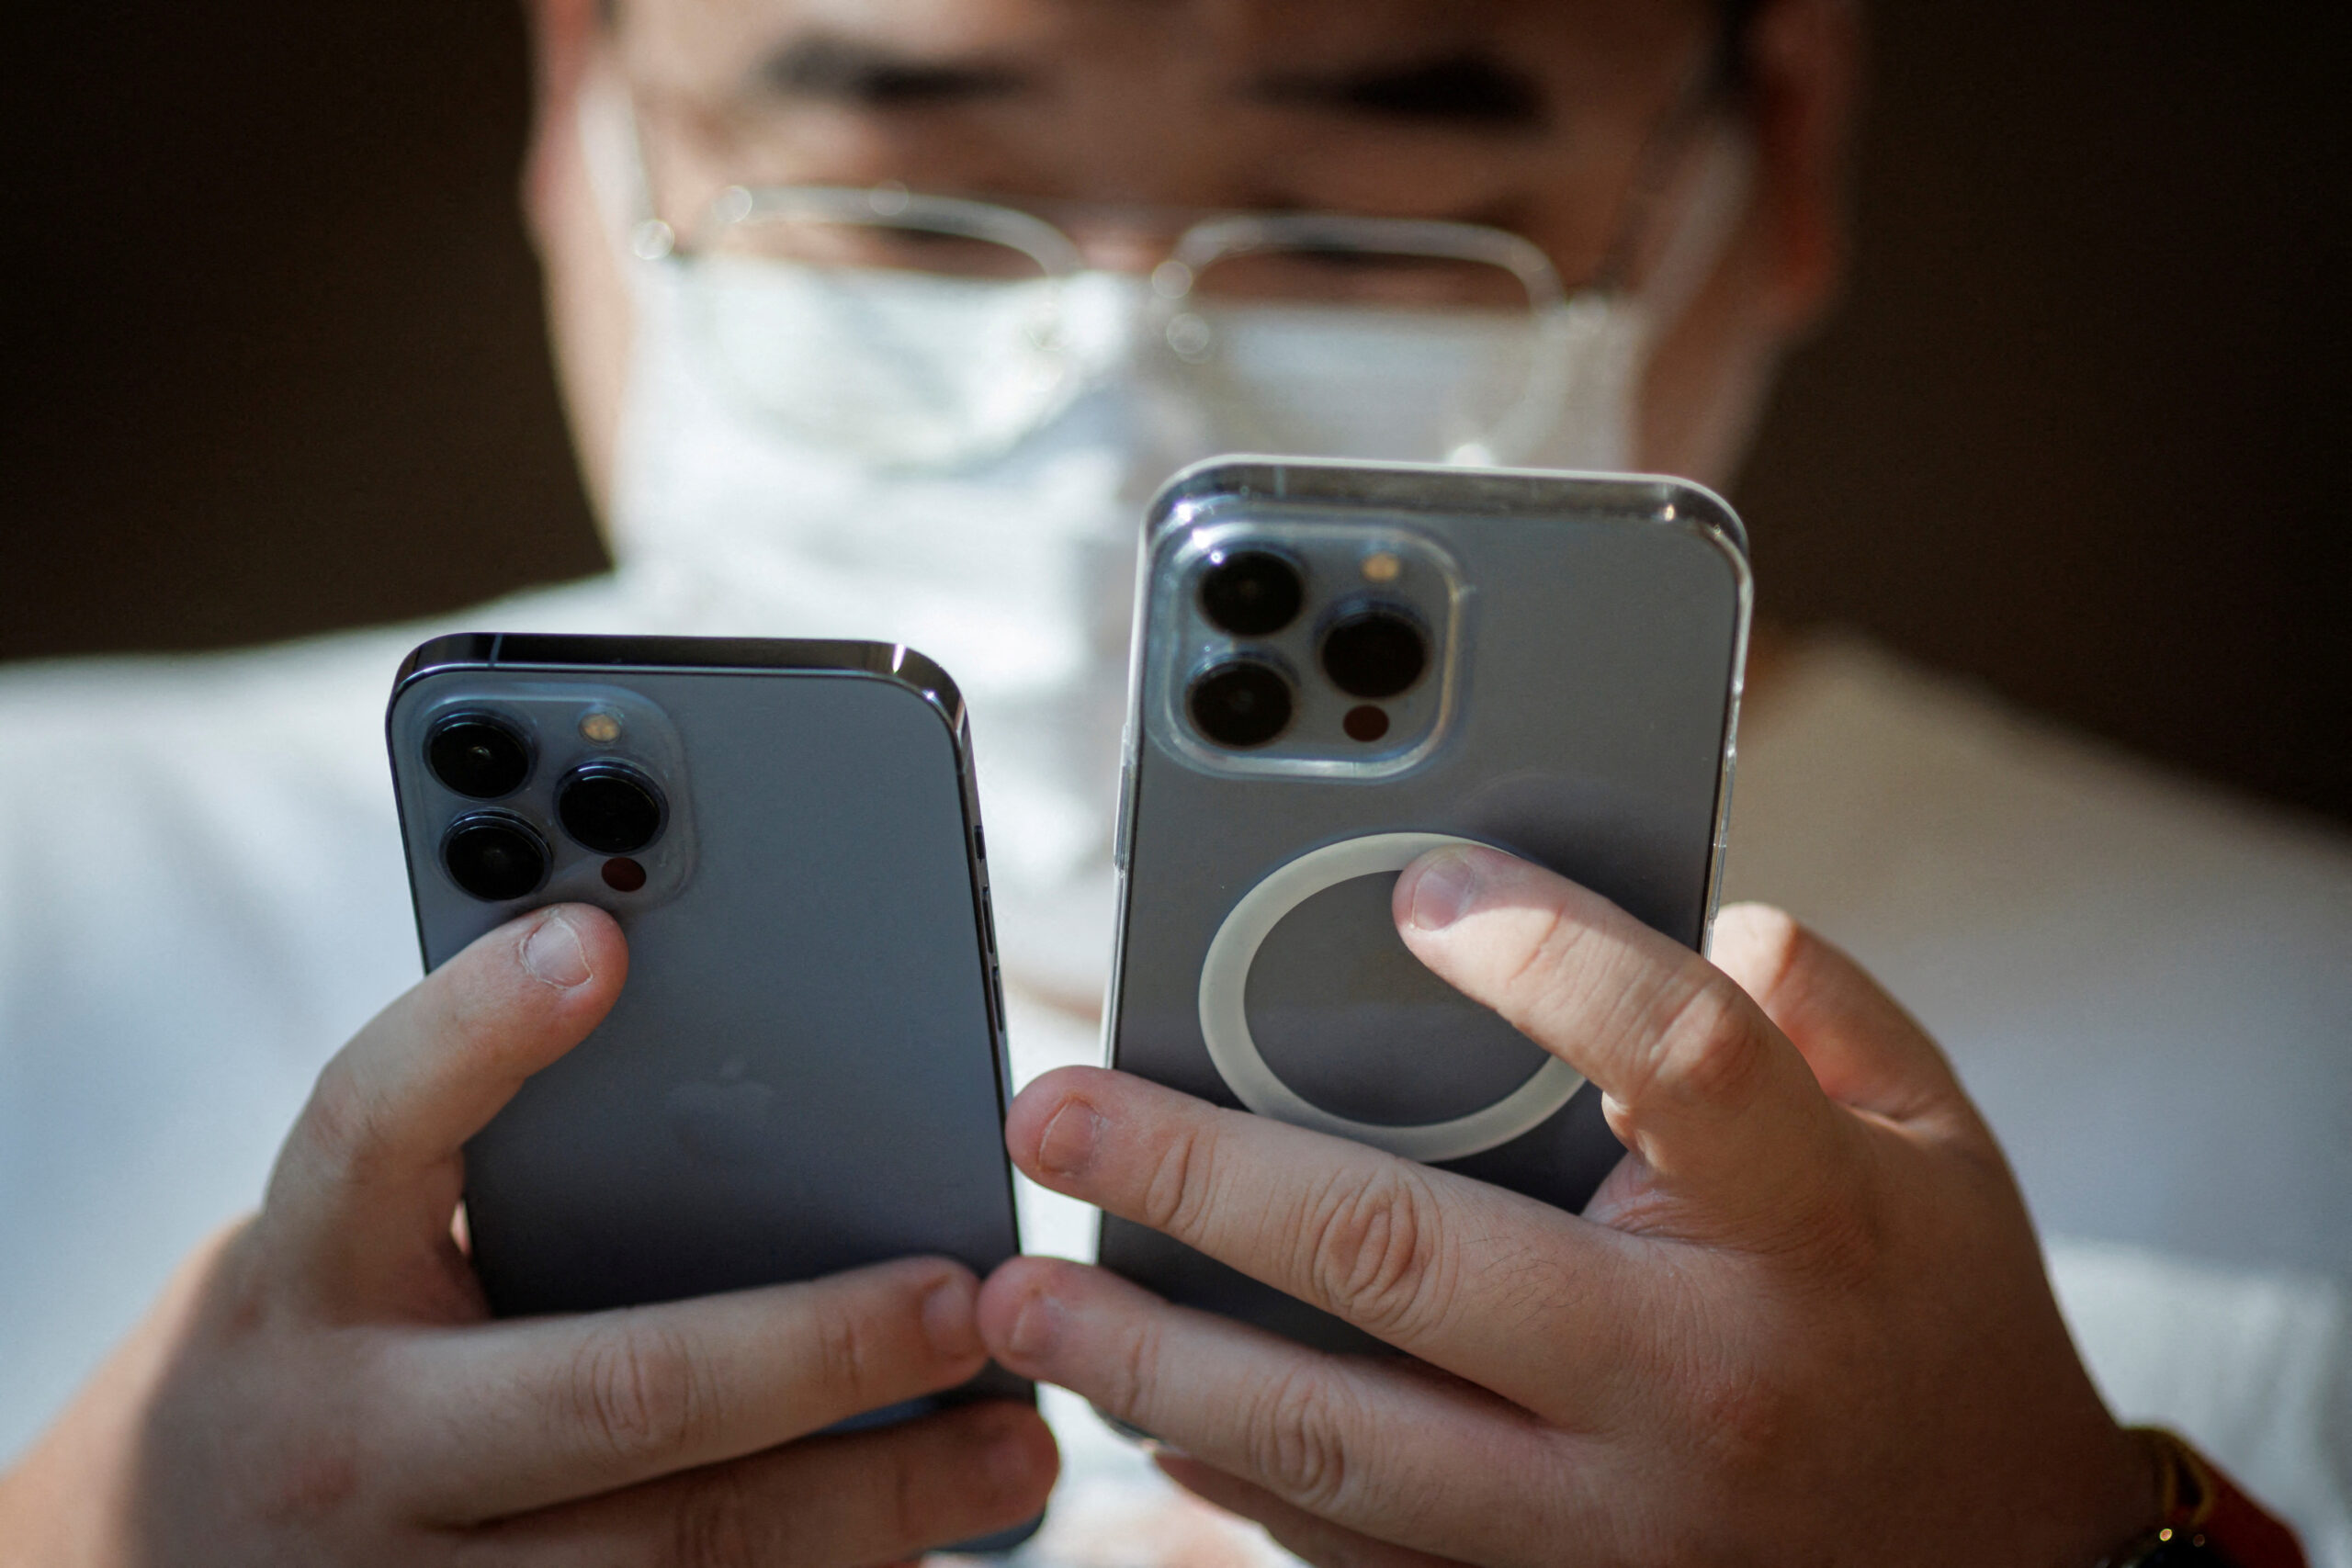 Foxconn: Taiwan-Based iPhone-Maker Investigated By China